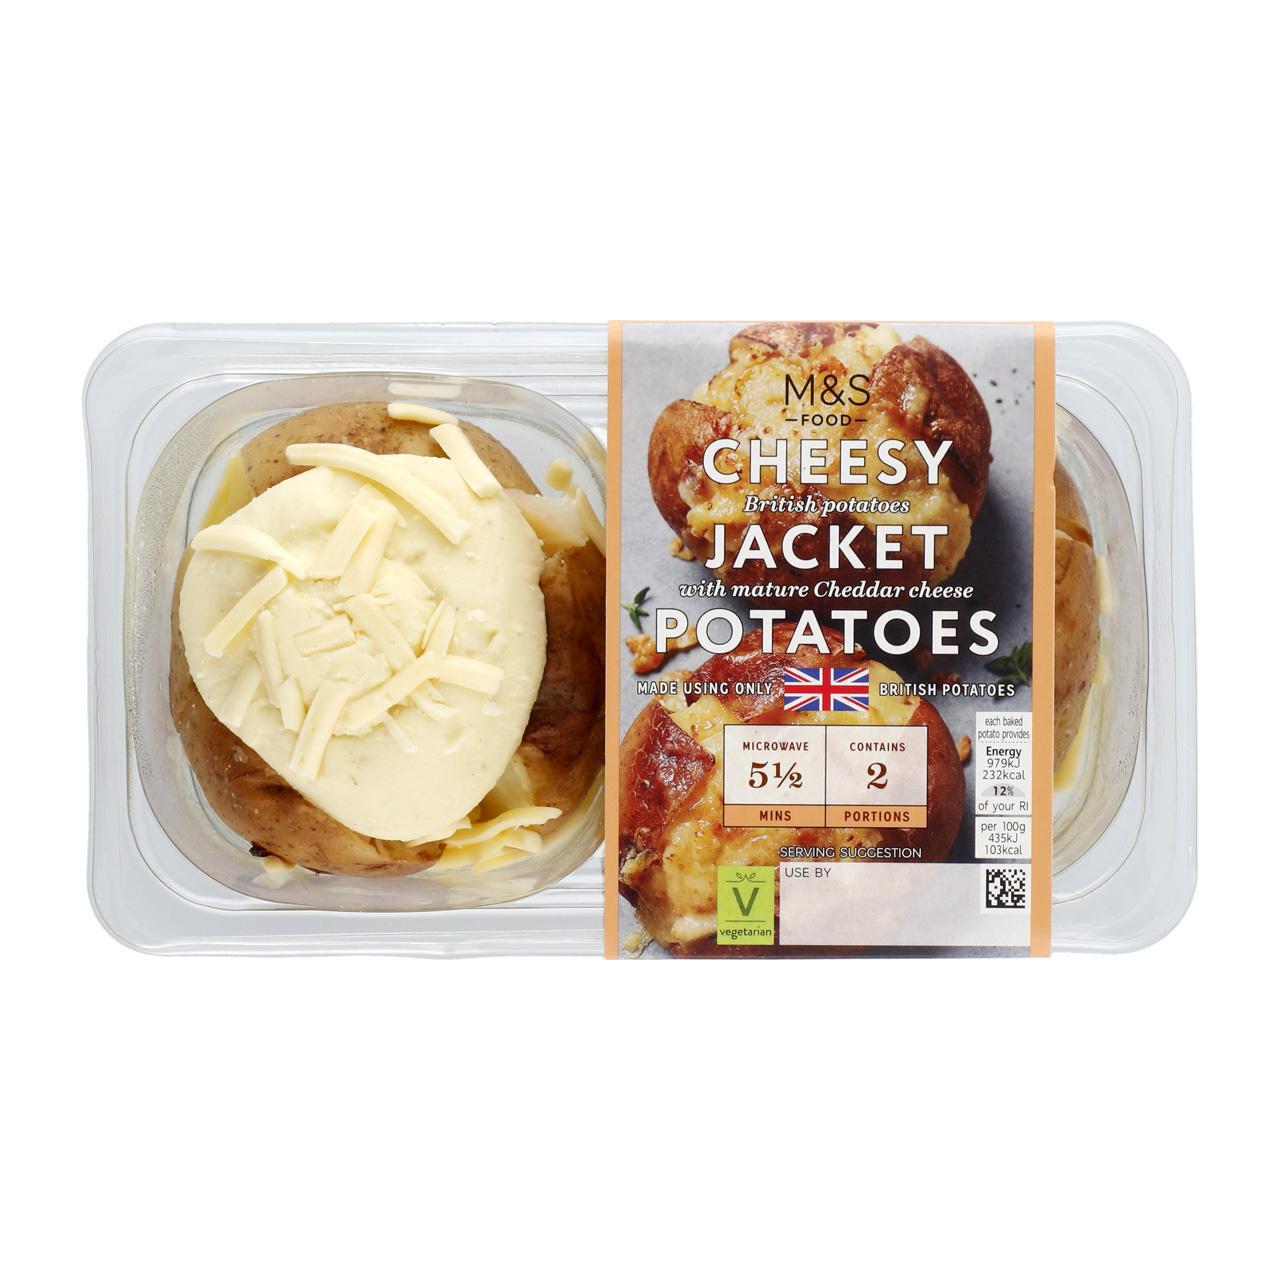 M&S 2 Baked Potatoes with Mature Cheddar Cheese 2 per pack